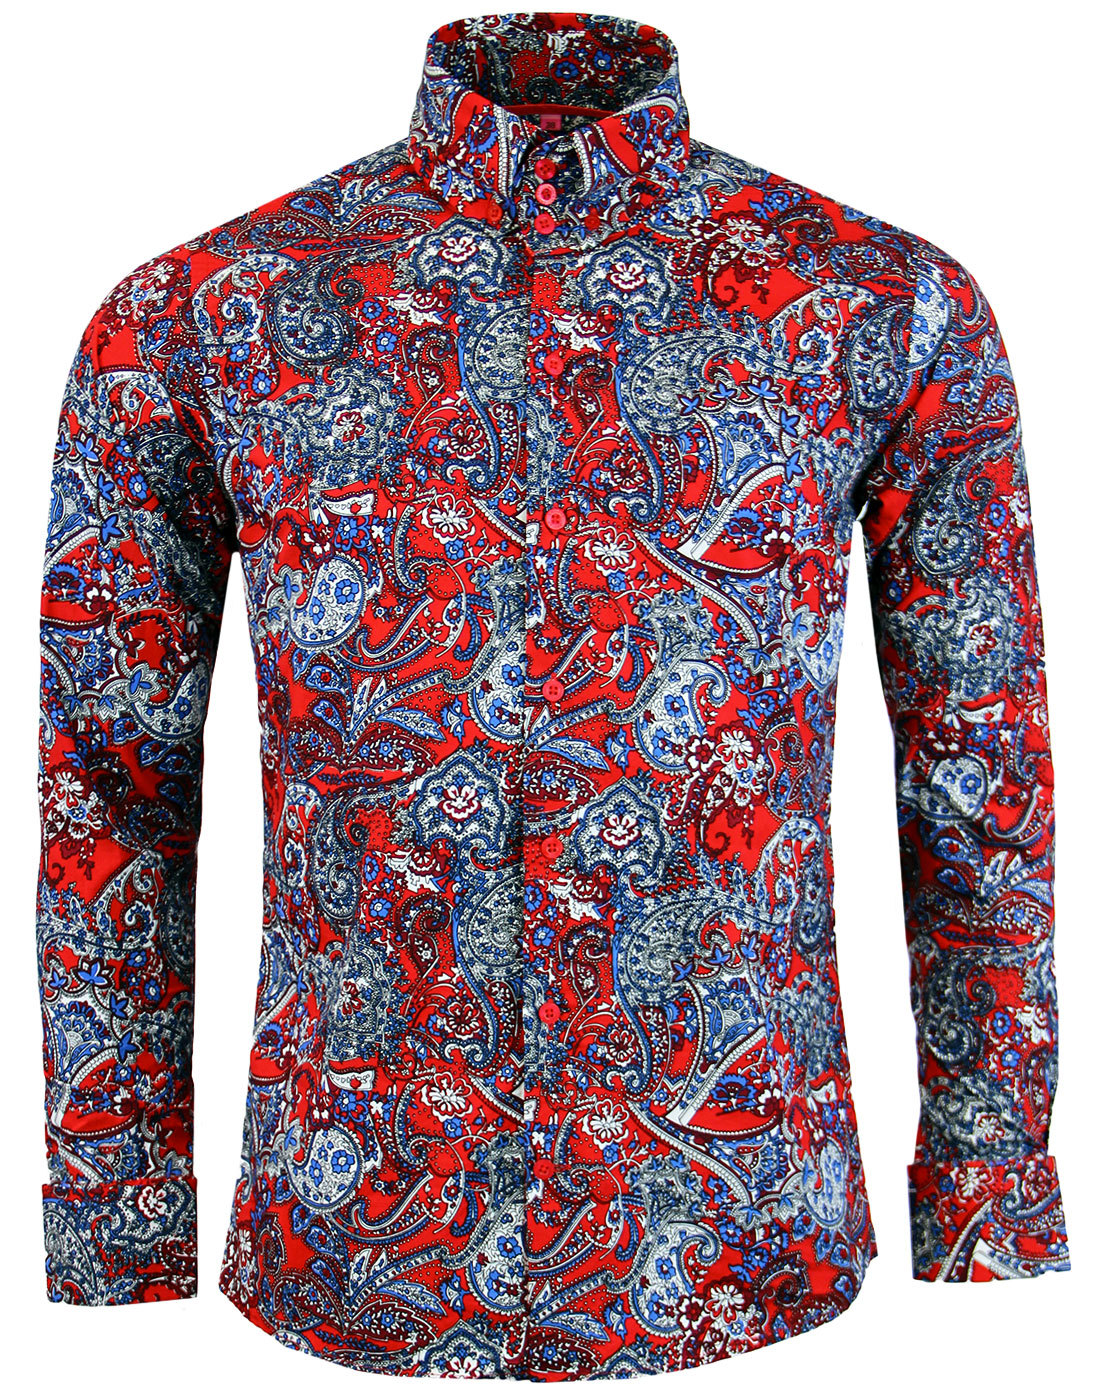 Madcap England Sunset Paisley Men's 60s Triple Top Button Shirt in Red